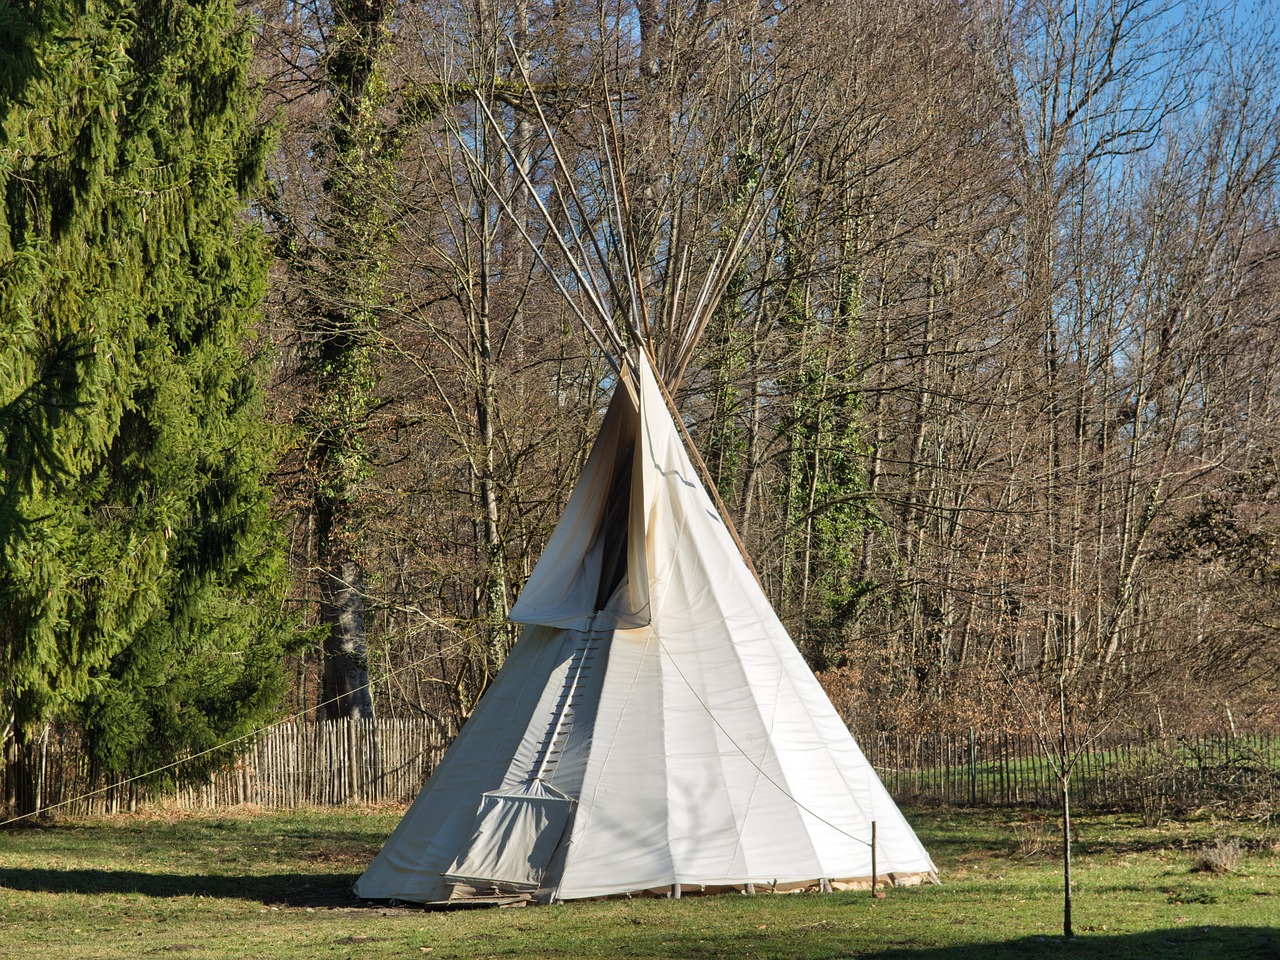 a teepee sitting on top of a lush green field, a photo, by Erwin Bowien, renaissance, winter, sunny day in the forrest, museum quality photo, very very well detailed image